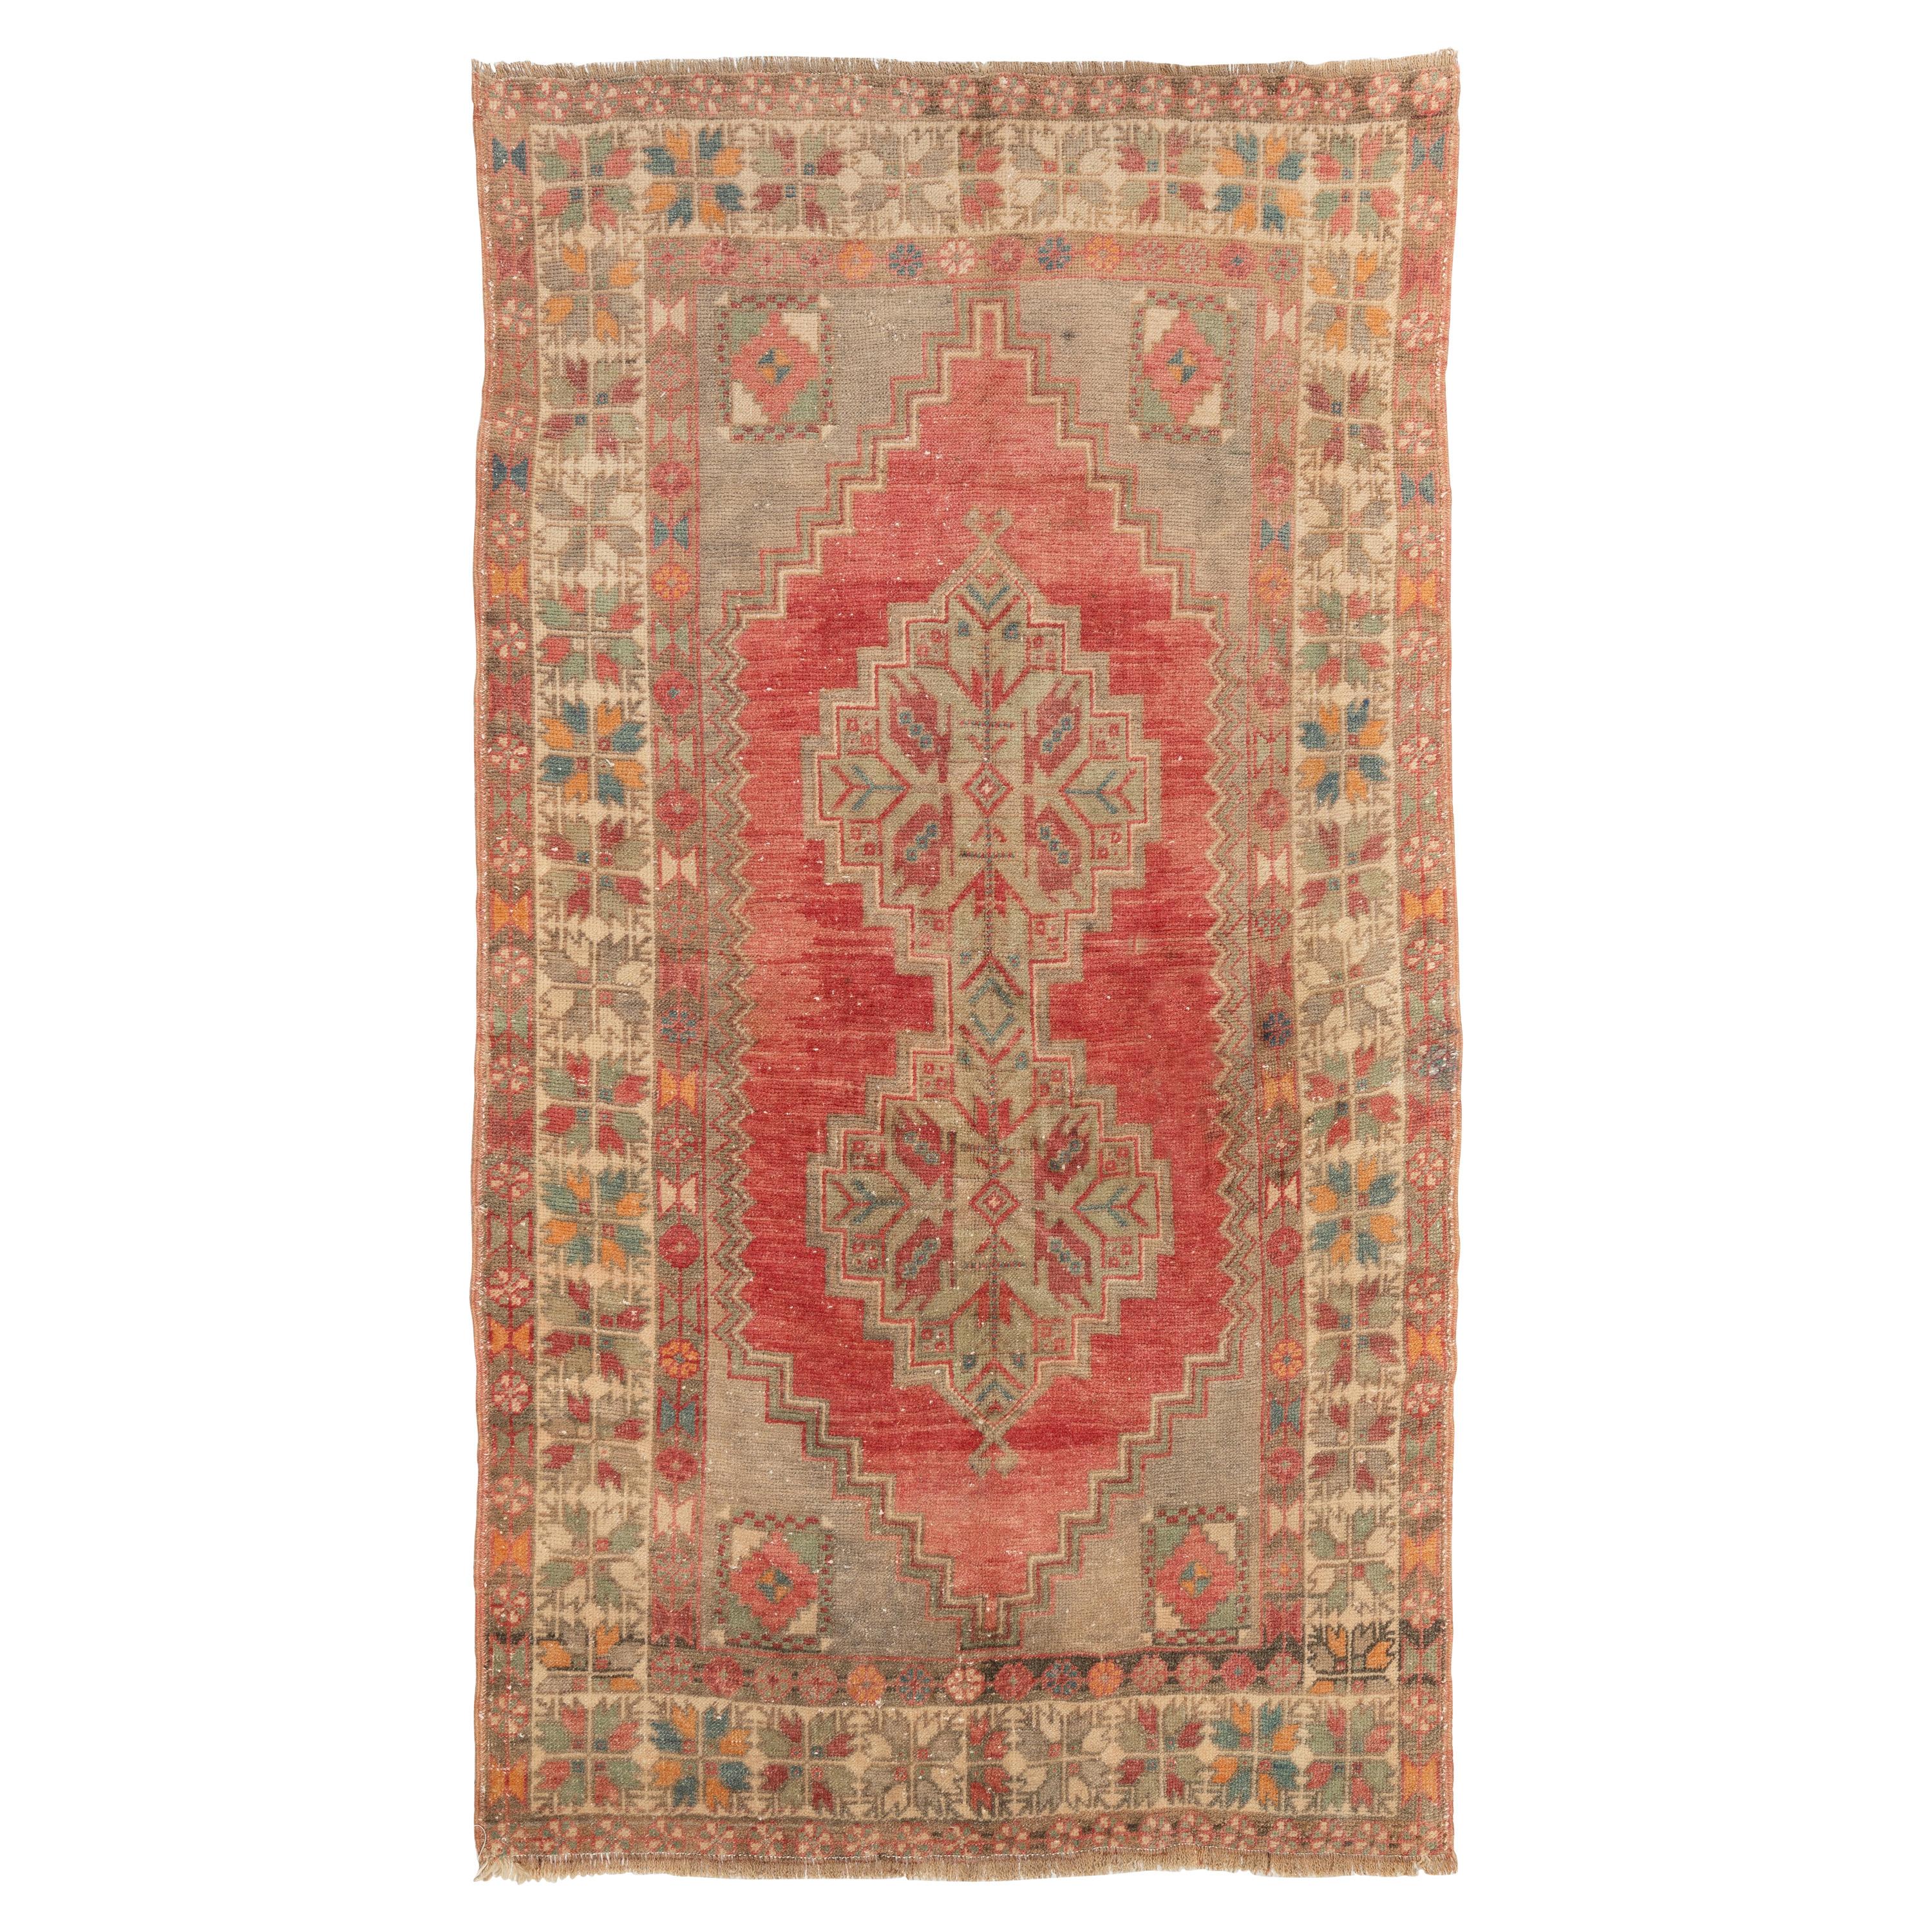 3.5x6 Ft Vintage Handmade Rug with Soft Wool Pile in Warm Red, Orange and Gray For Sale